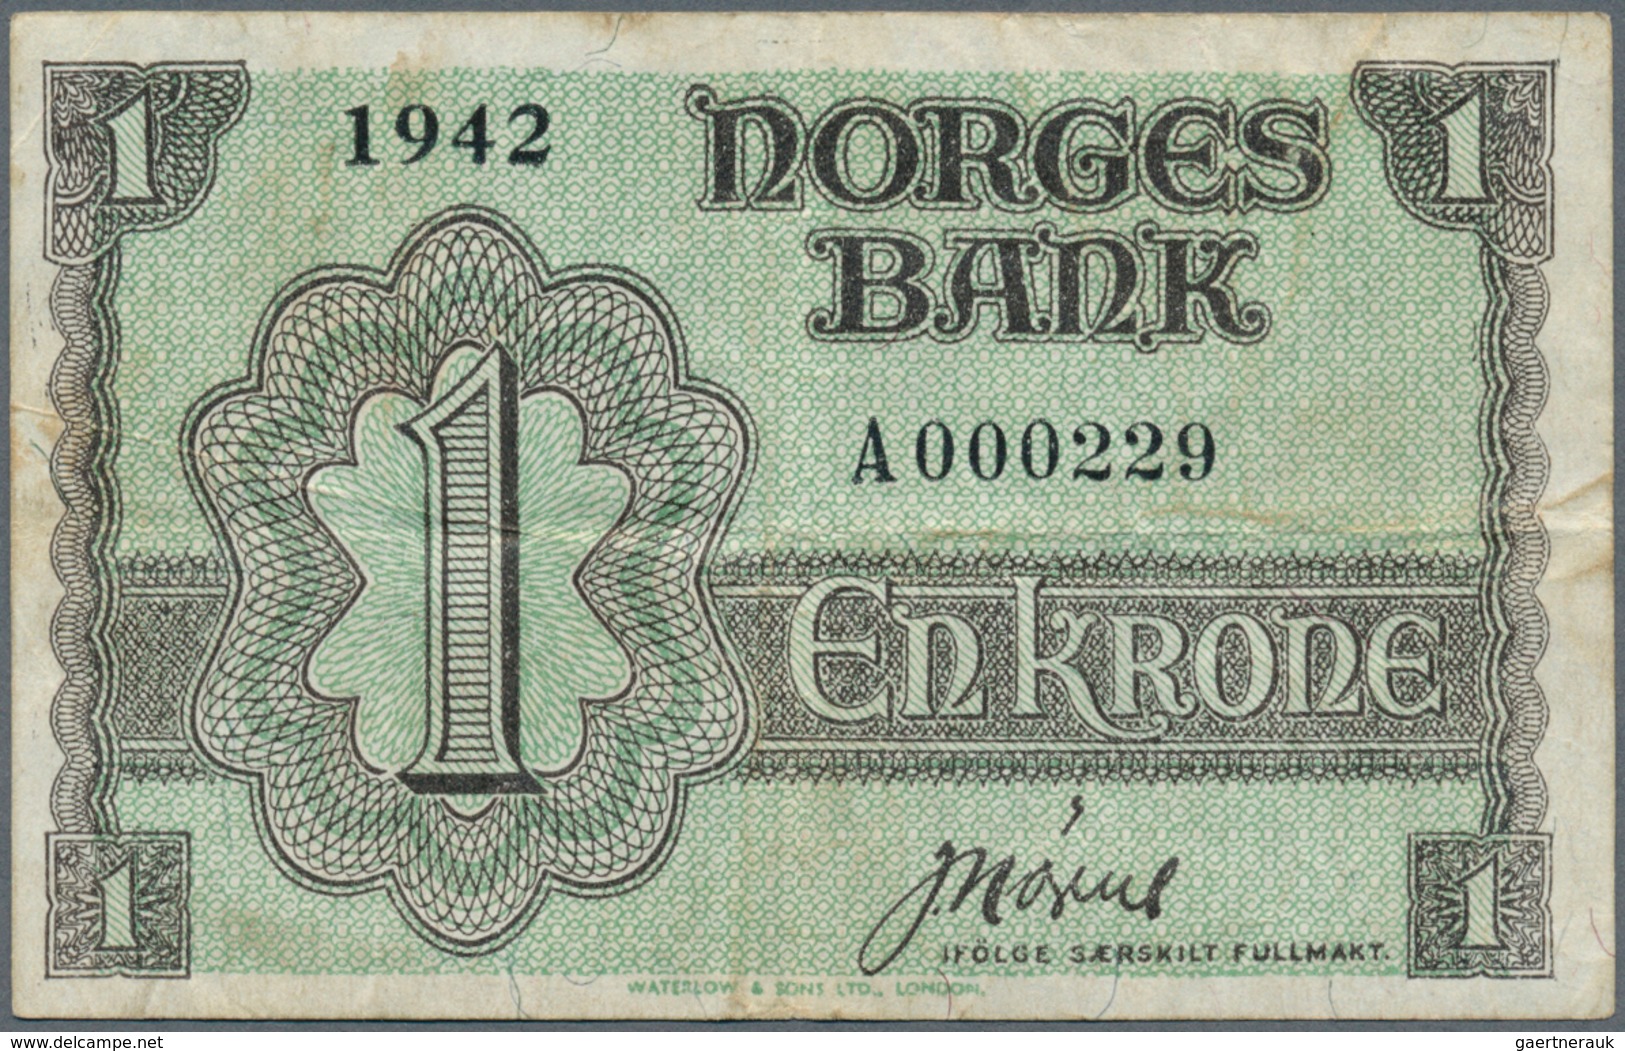 02171 Norway / Norwegen: 1 Krone 1942 P. 17a With Very Low Serial Number #A000229, So This Note Was The 22 - Noruega